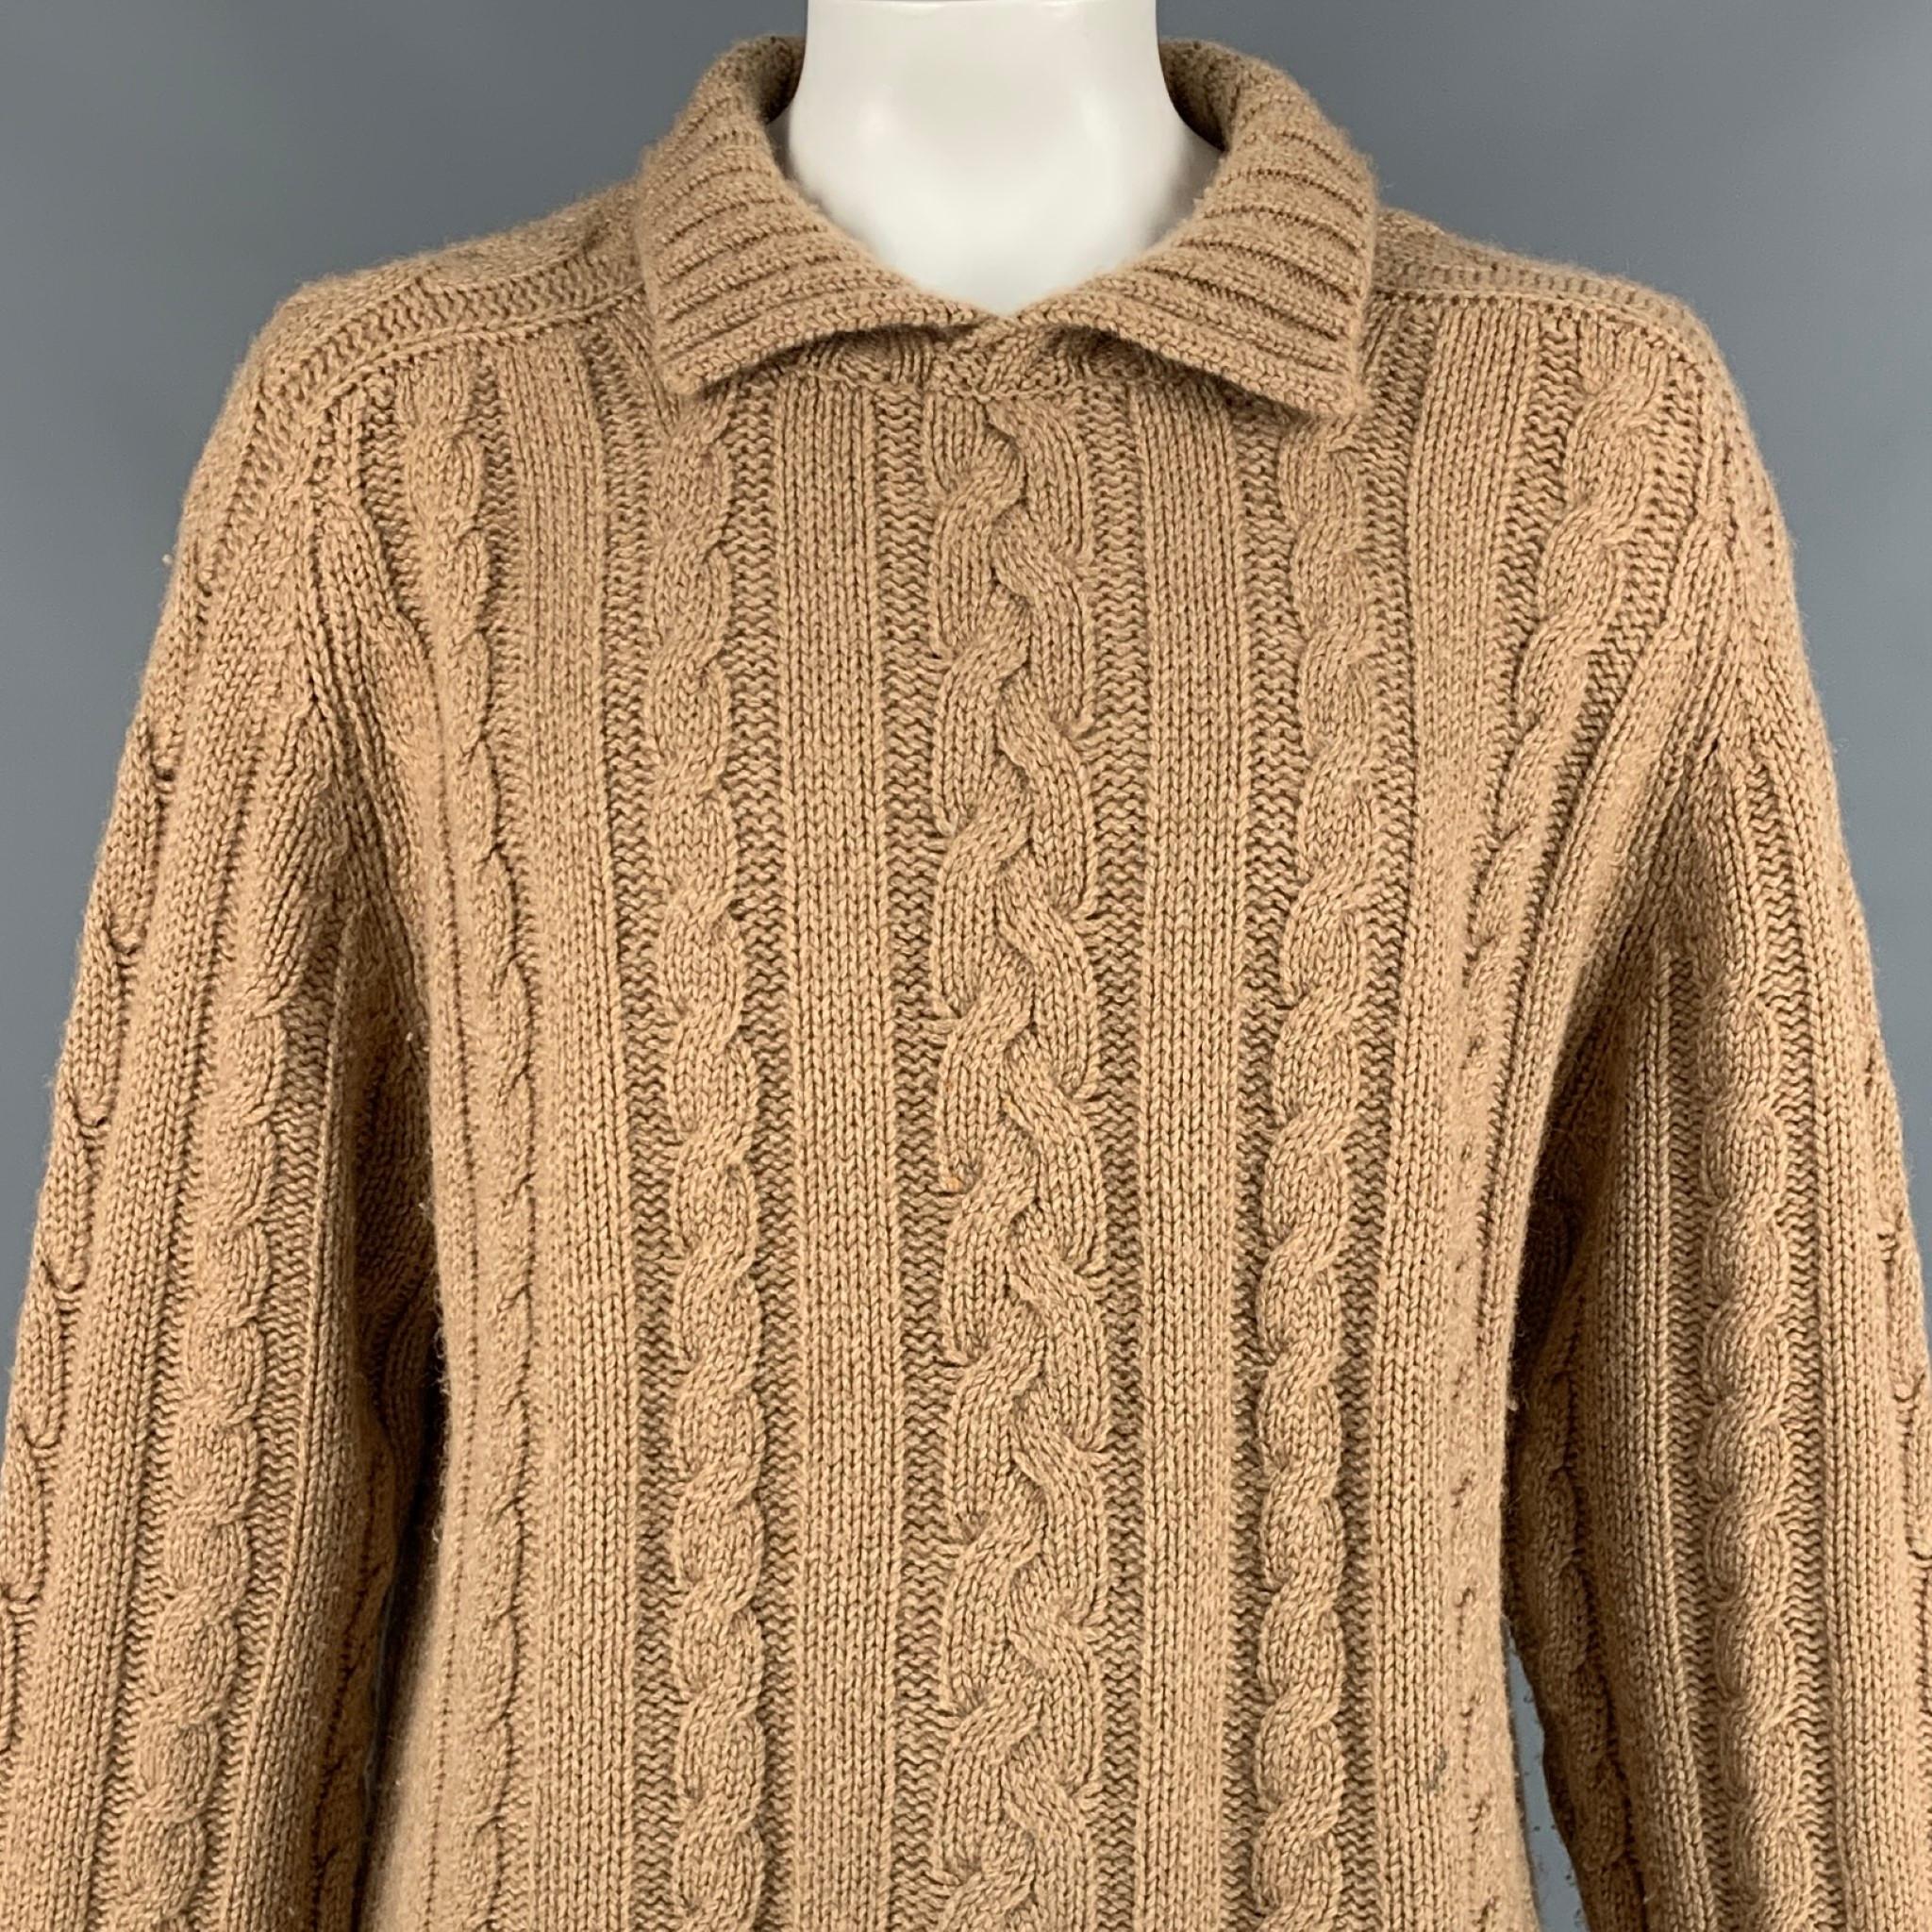 BURBERRY LONDON sweater comes in a camel cable knit camel hair featuring a loose fit and a spread collar. Made in England. 

Very Good Pre-Owned Condition. Light marks at front.
Marked: XL

Measurements:

Shoulder: 18 in.
Chest: 52 in.
Sleeve: 32